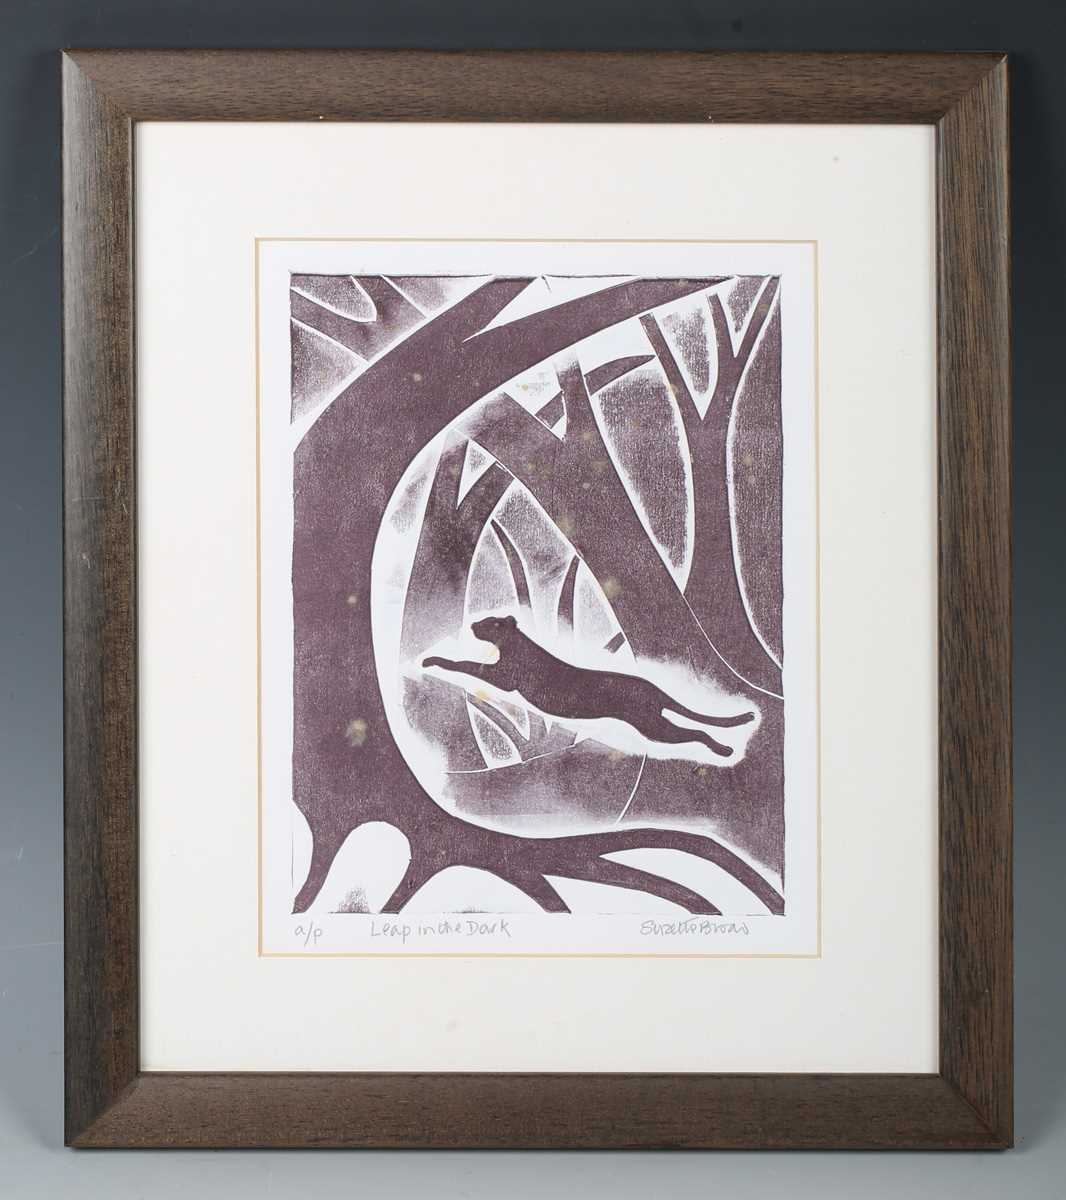 Enid Marx – ‘Goosey, Goosey, Gander’, 20th century wood engraving, signed and editioned 9/50 in - Image 14 of 14